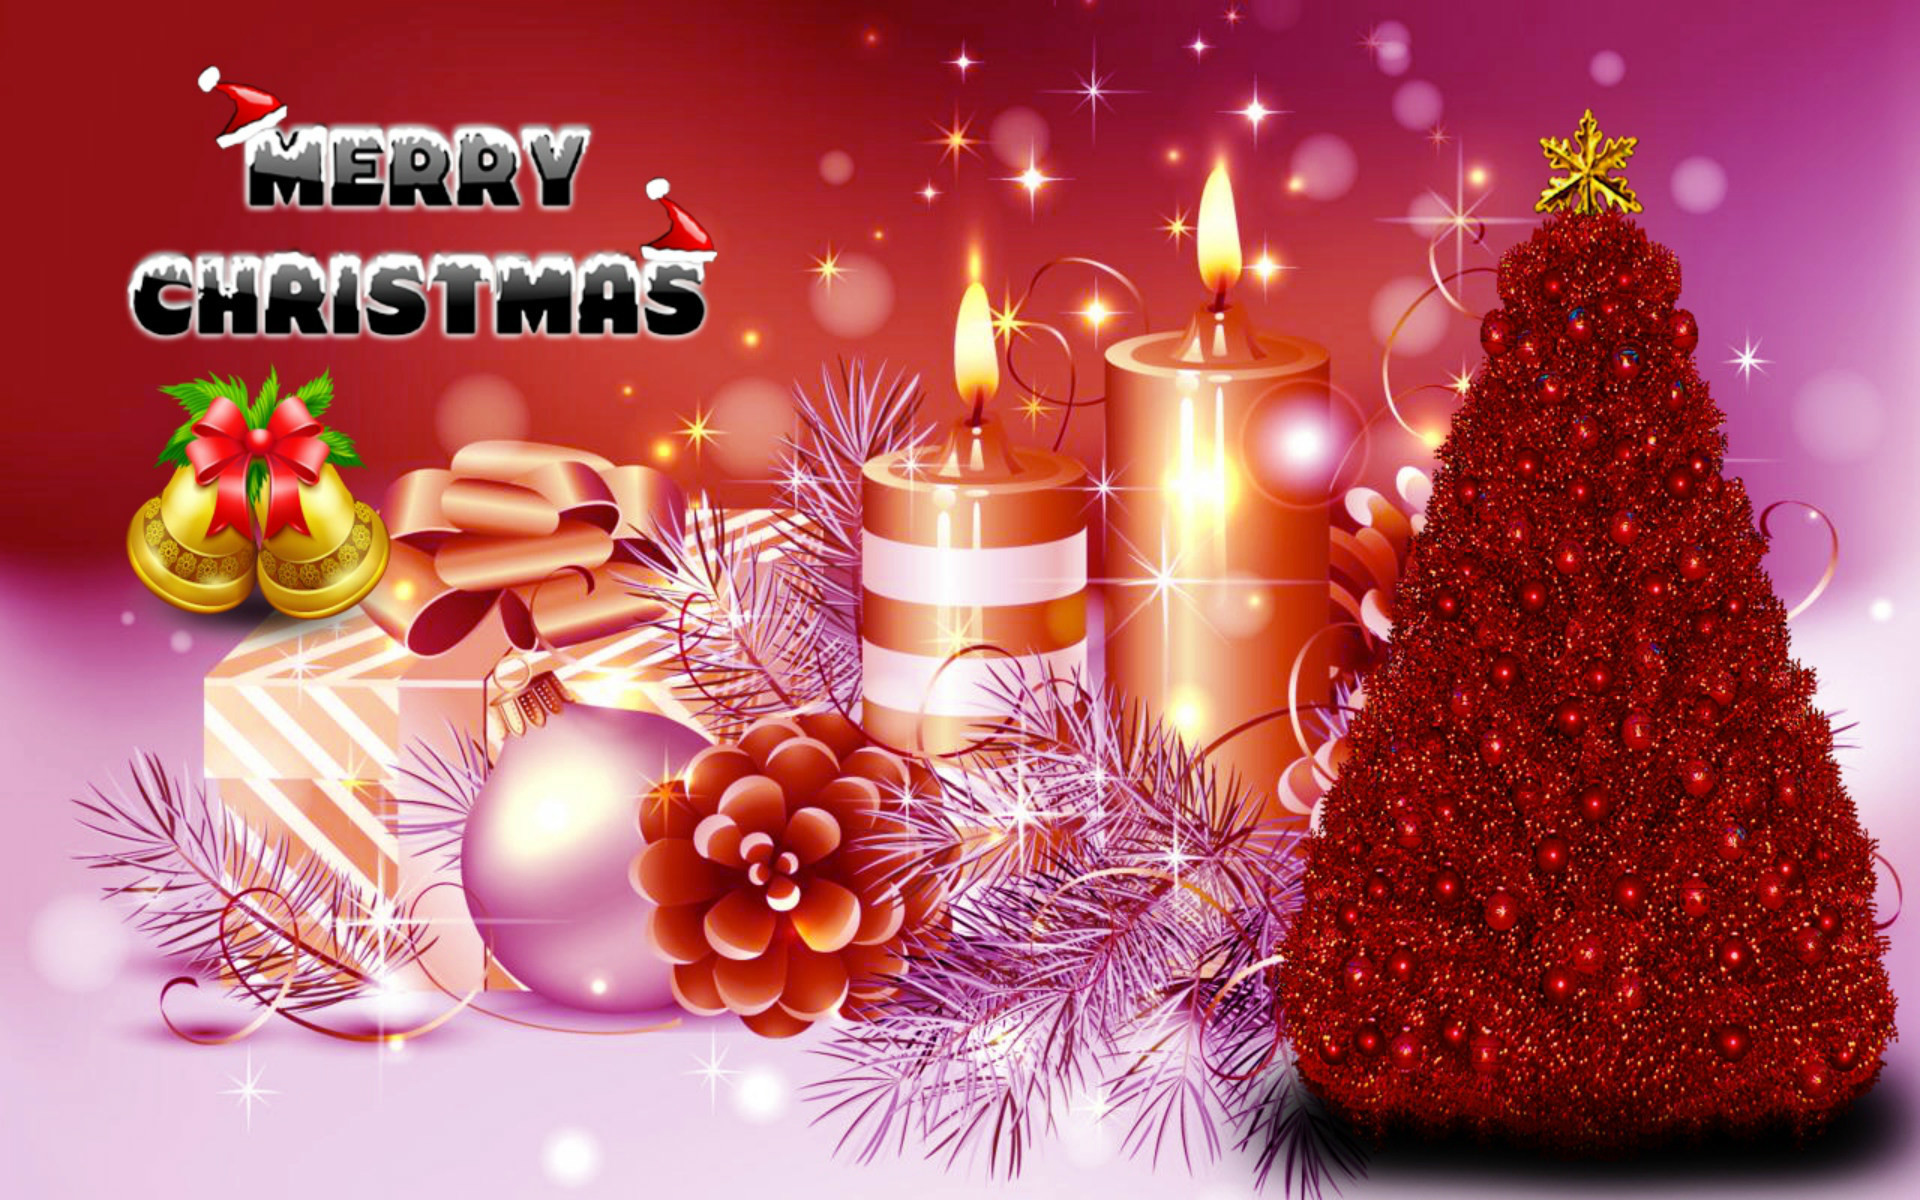 15 Merry Christmas Free Hd Wallpapers